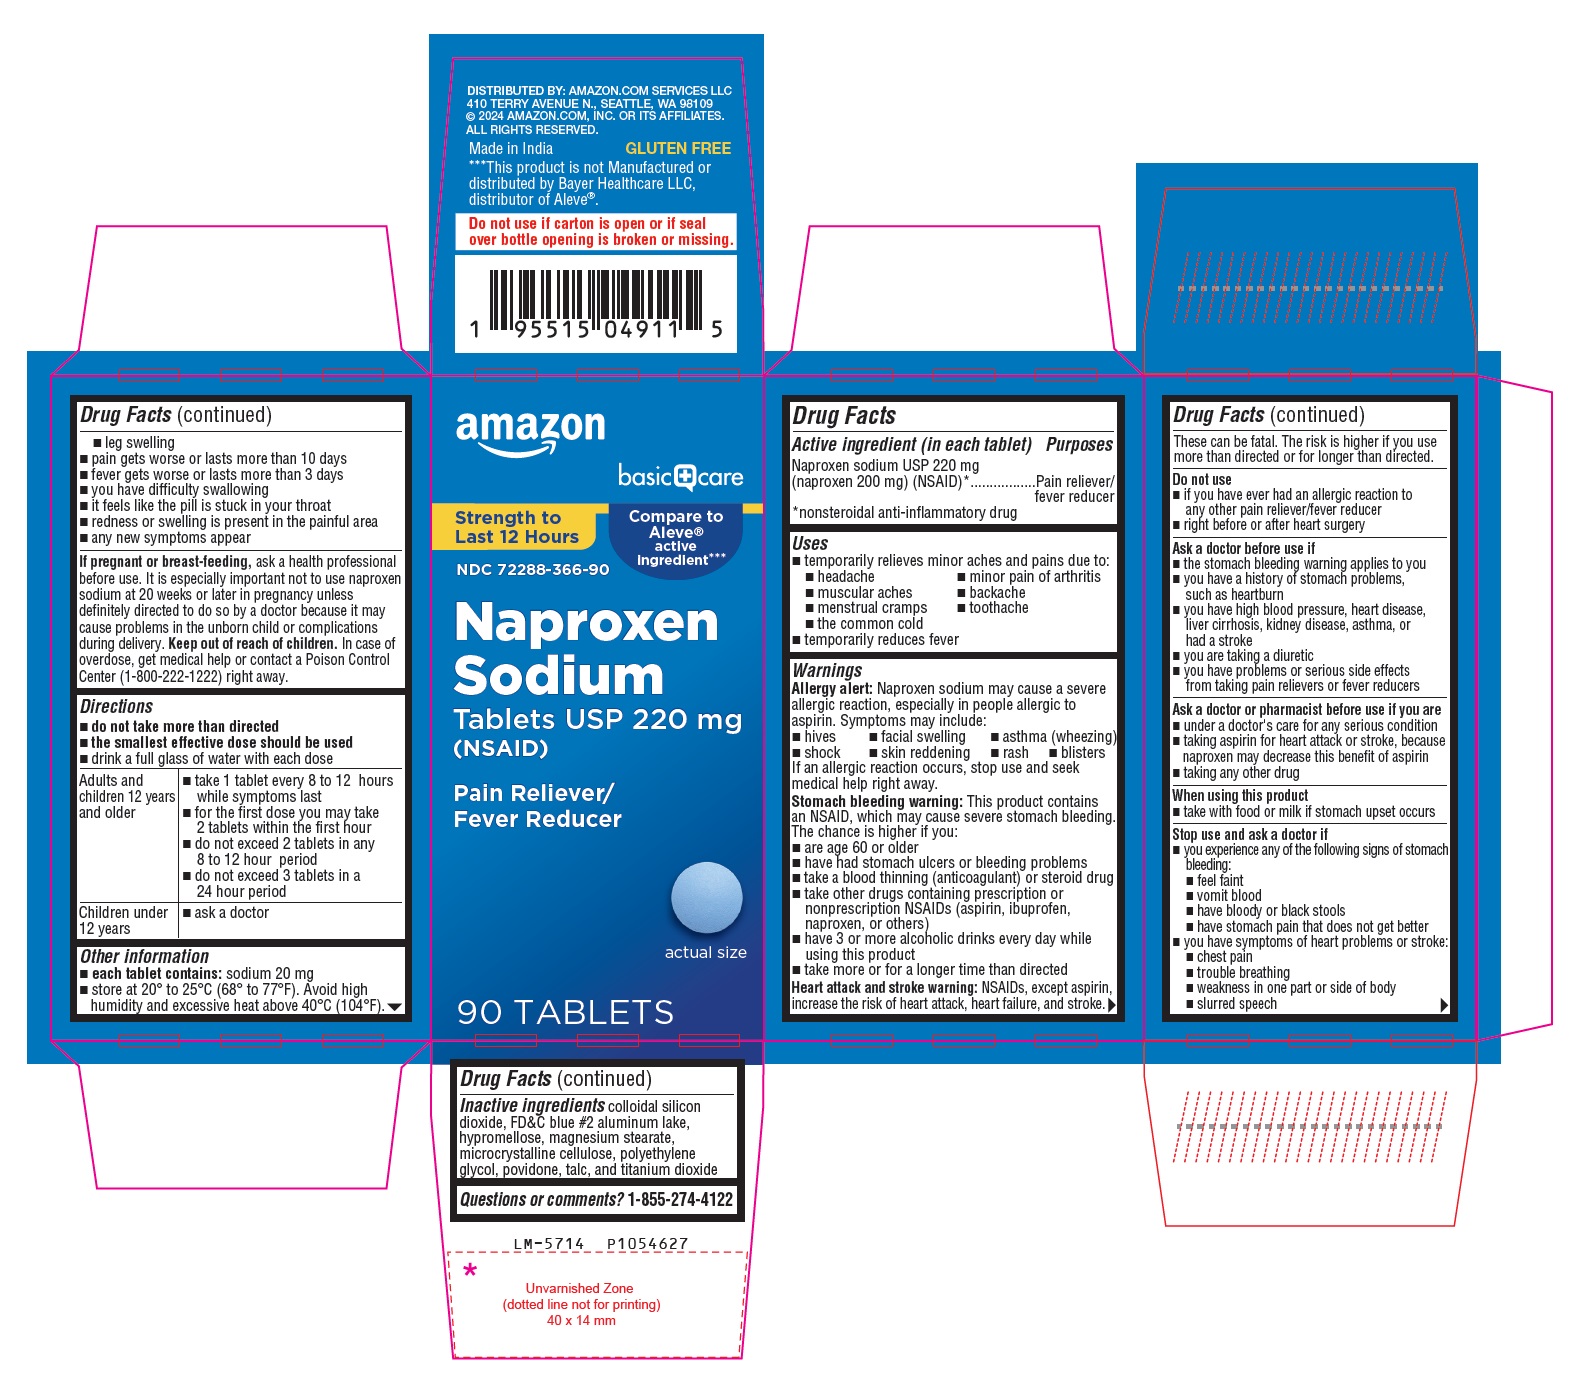 PACKAGE LABEL-PRINCIPAL DISPLAY PANEL - 220 mg (90 Tablets Container Carton Label)